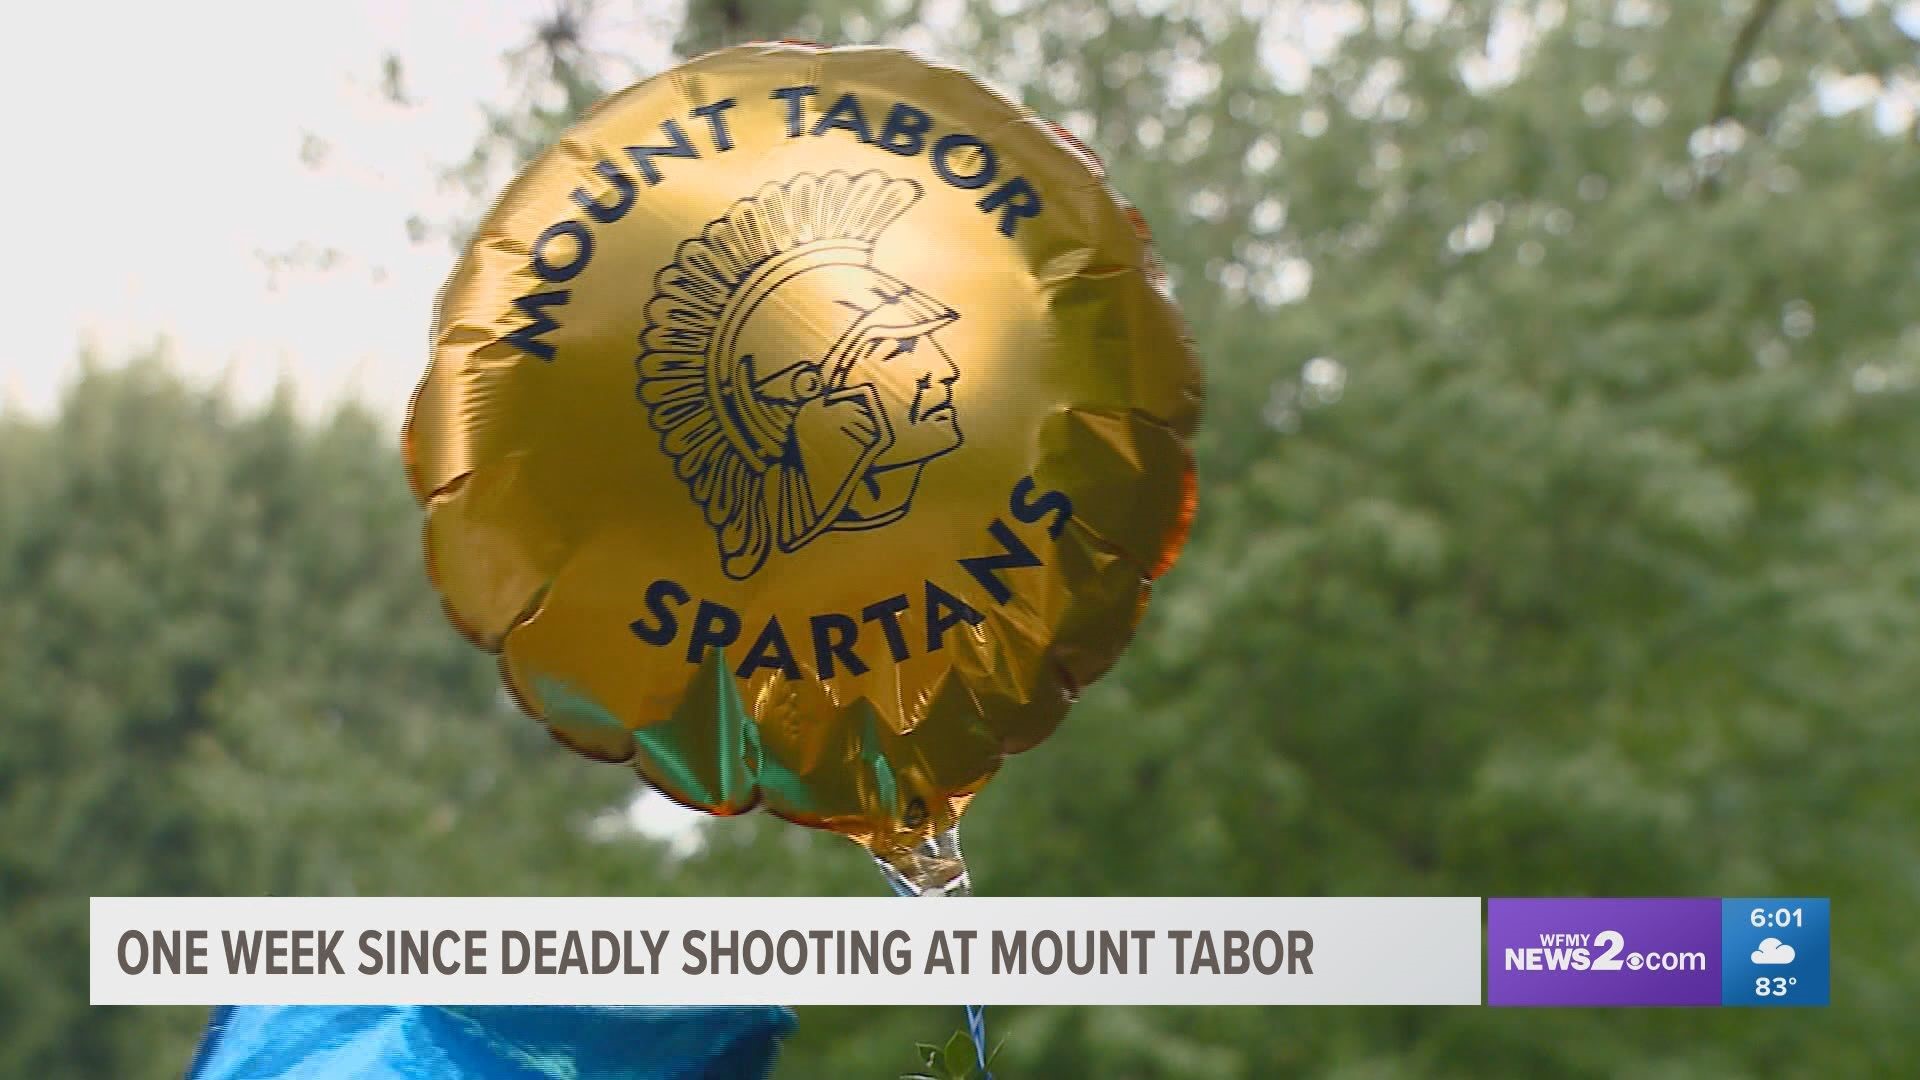 William Chavis Renard Miller, Jr. was shot and killed on campus at Mt. Tabor on Aug. 31.